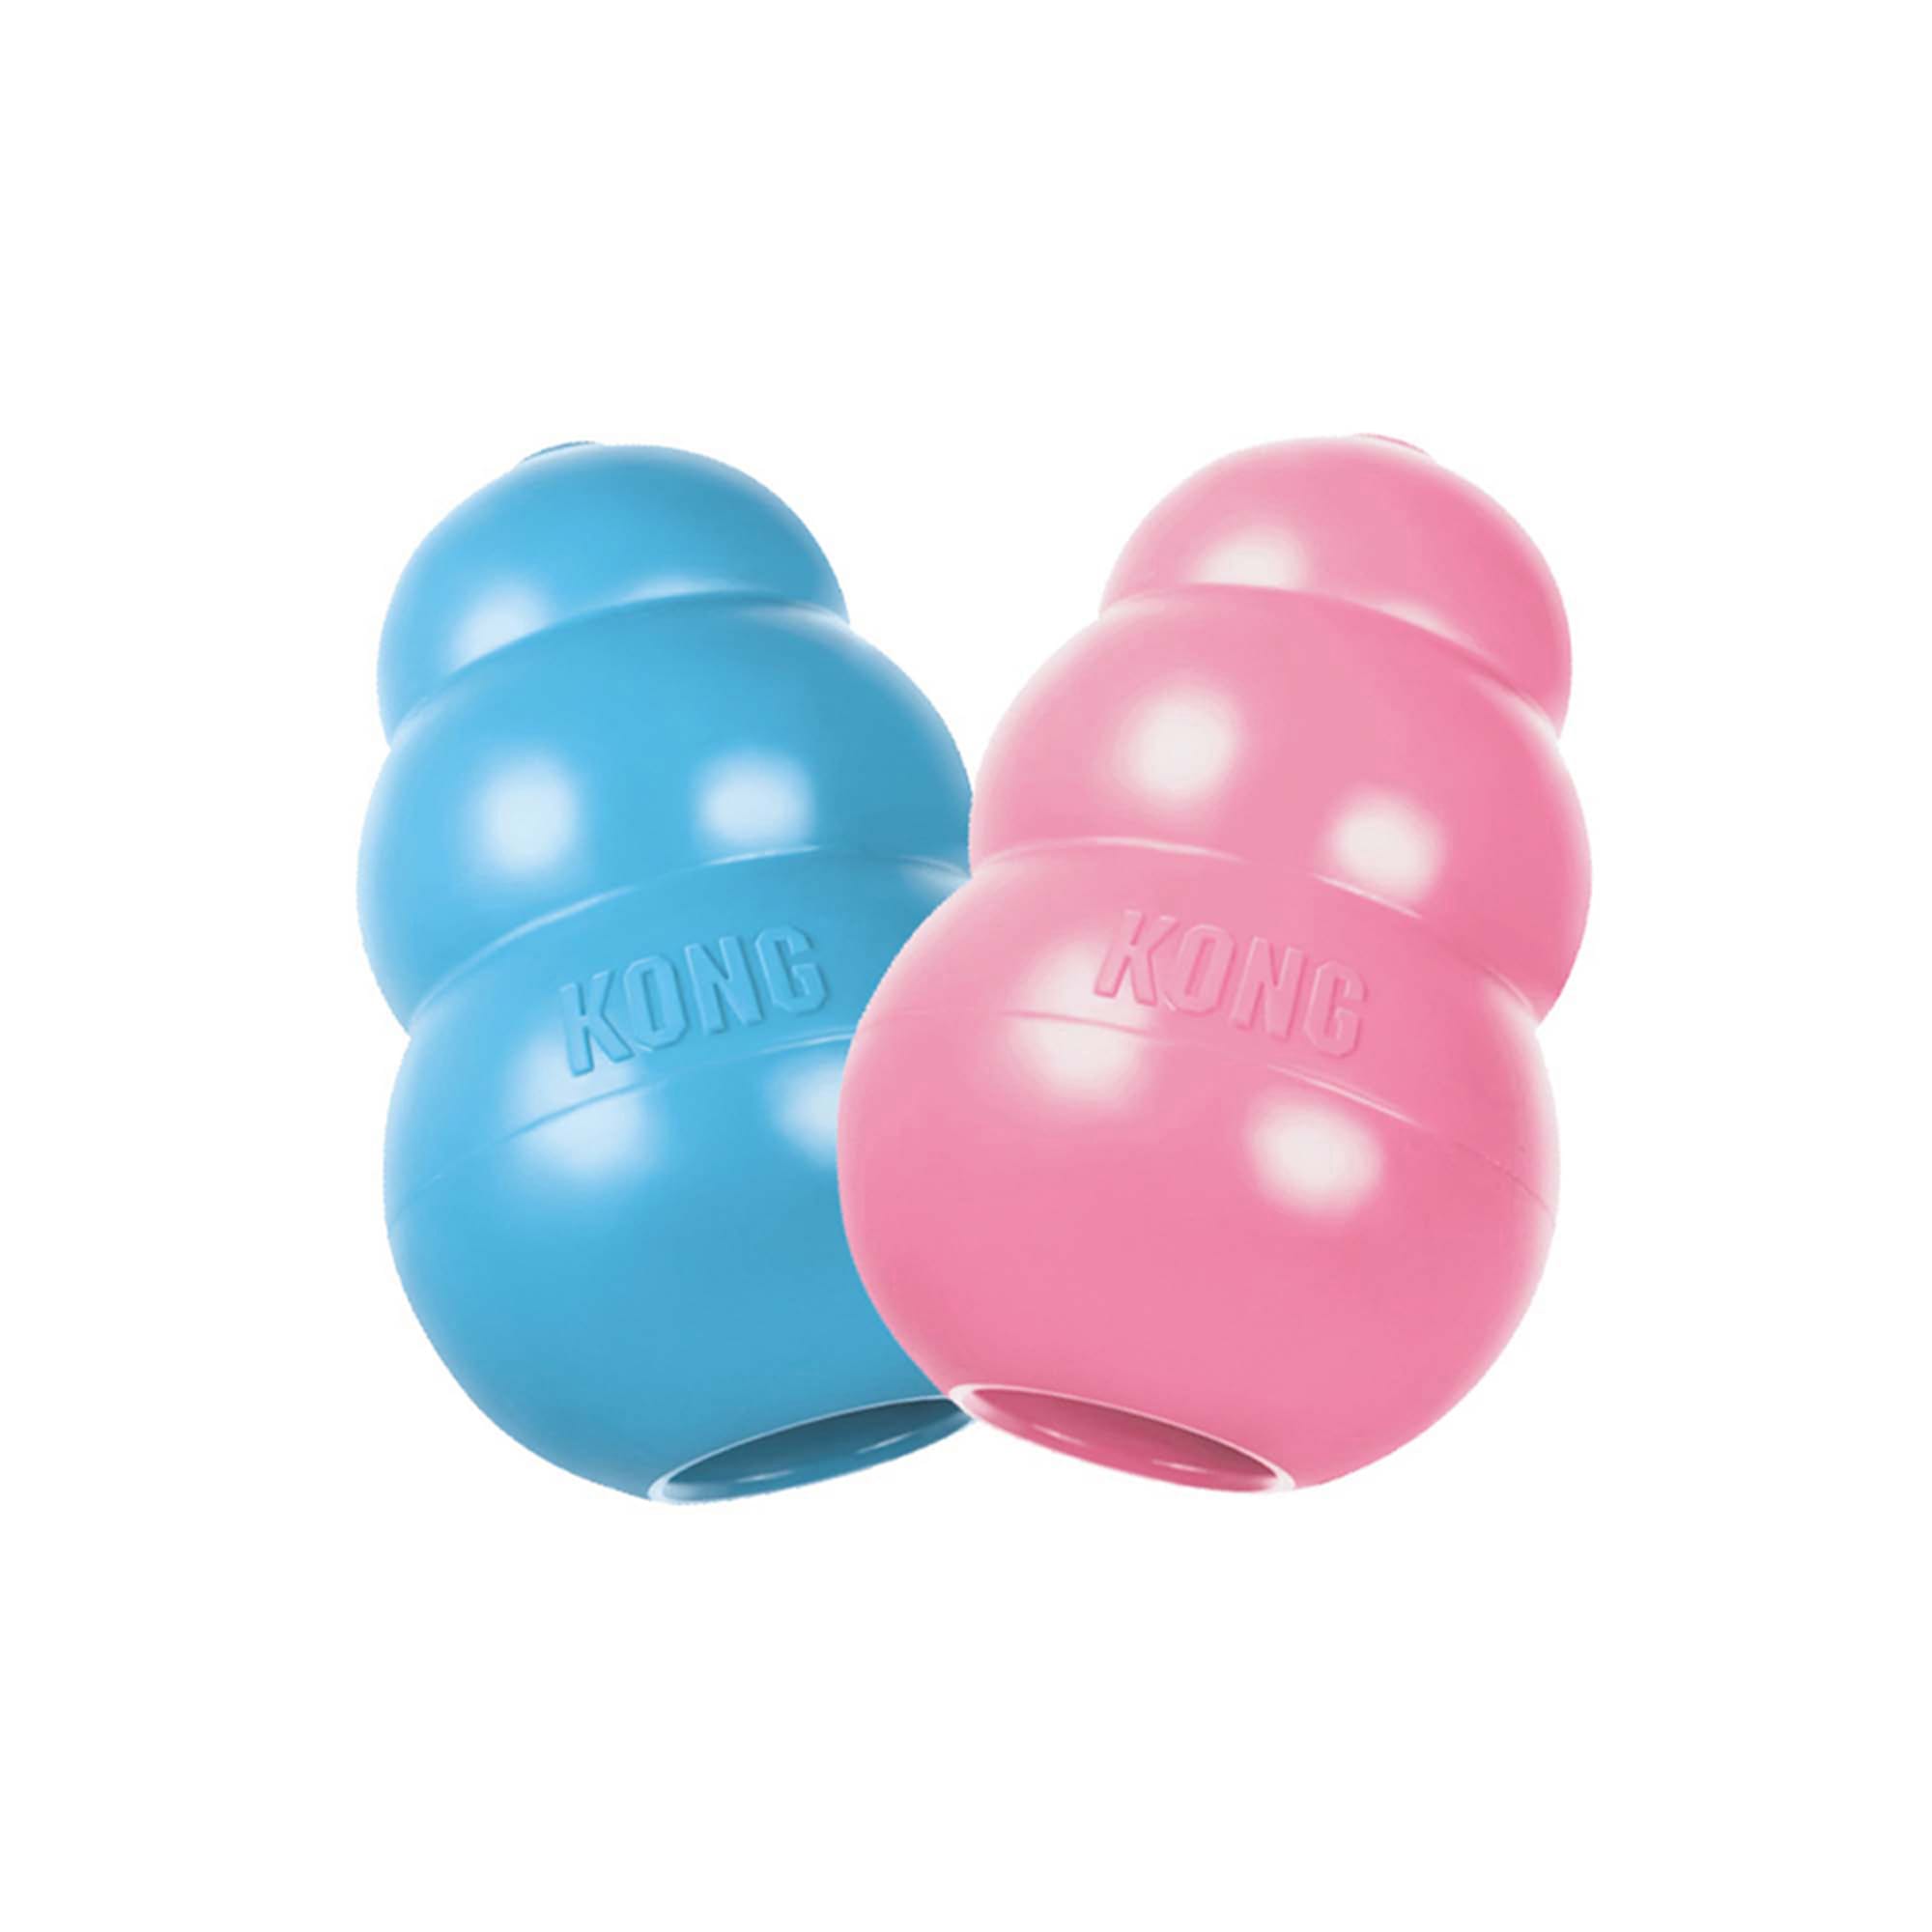 KONG Puppy KONG Toy, Large, Assorted Pink/Blue